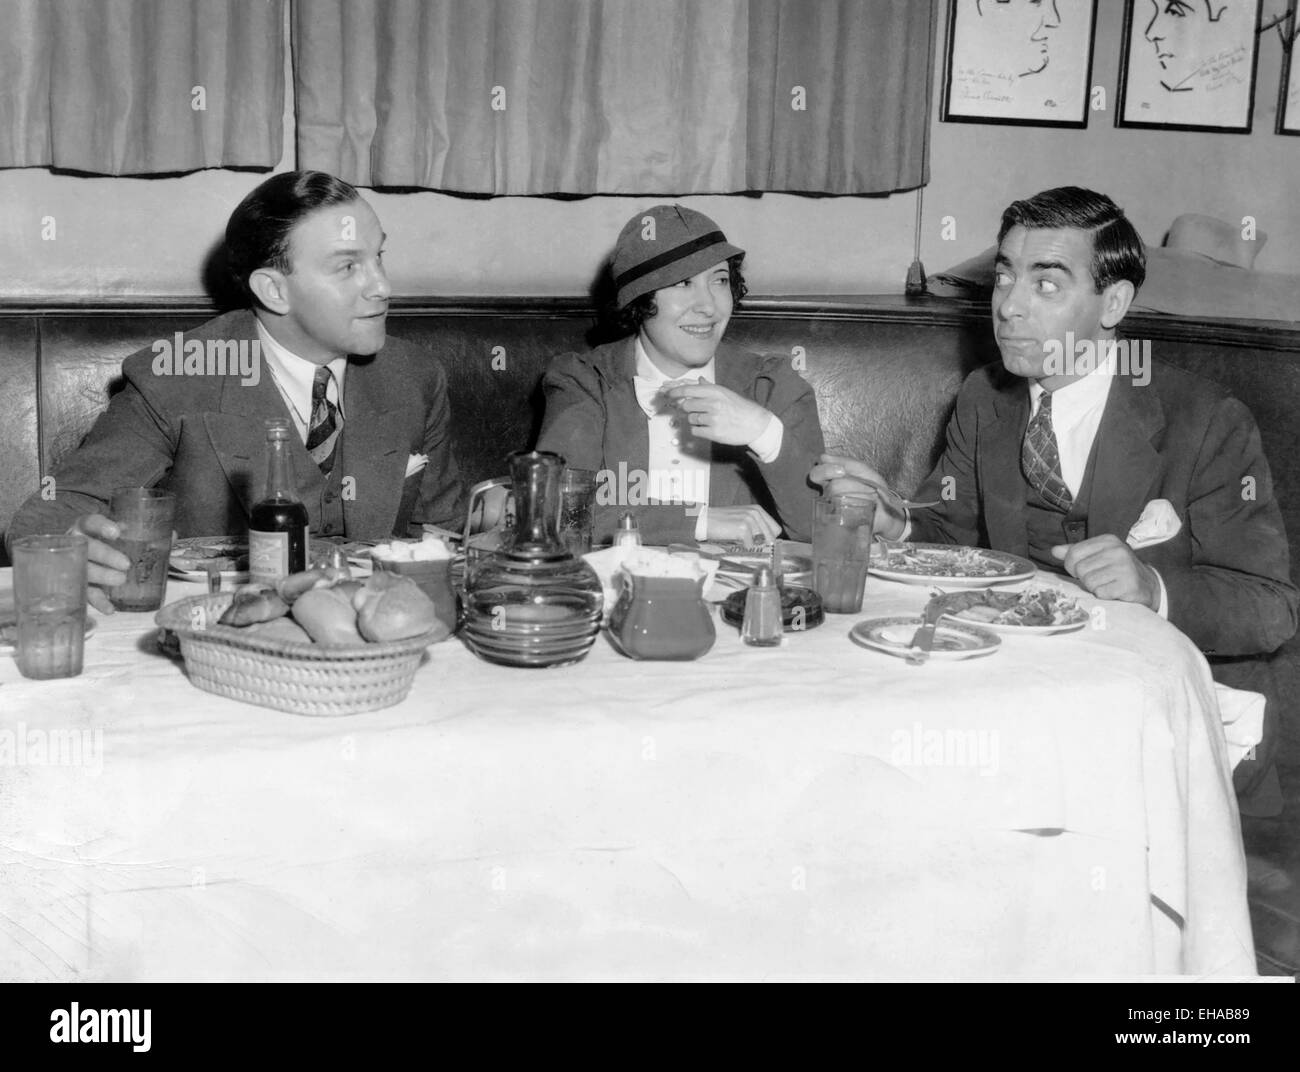 George Burns, Gracie Allen, Eddie Cantor, Lunching at Brown Derby, Los Angeles, California, USA, November 7, 1933 Stock Photo